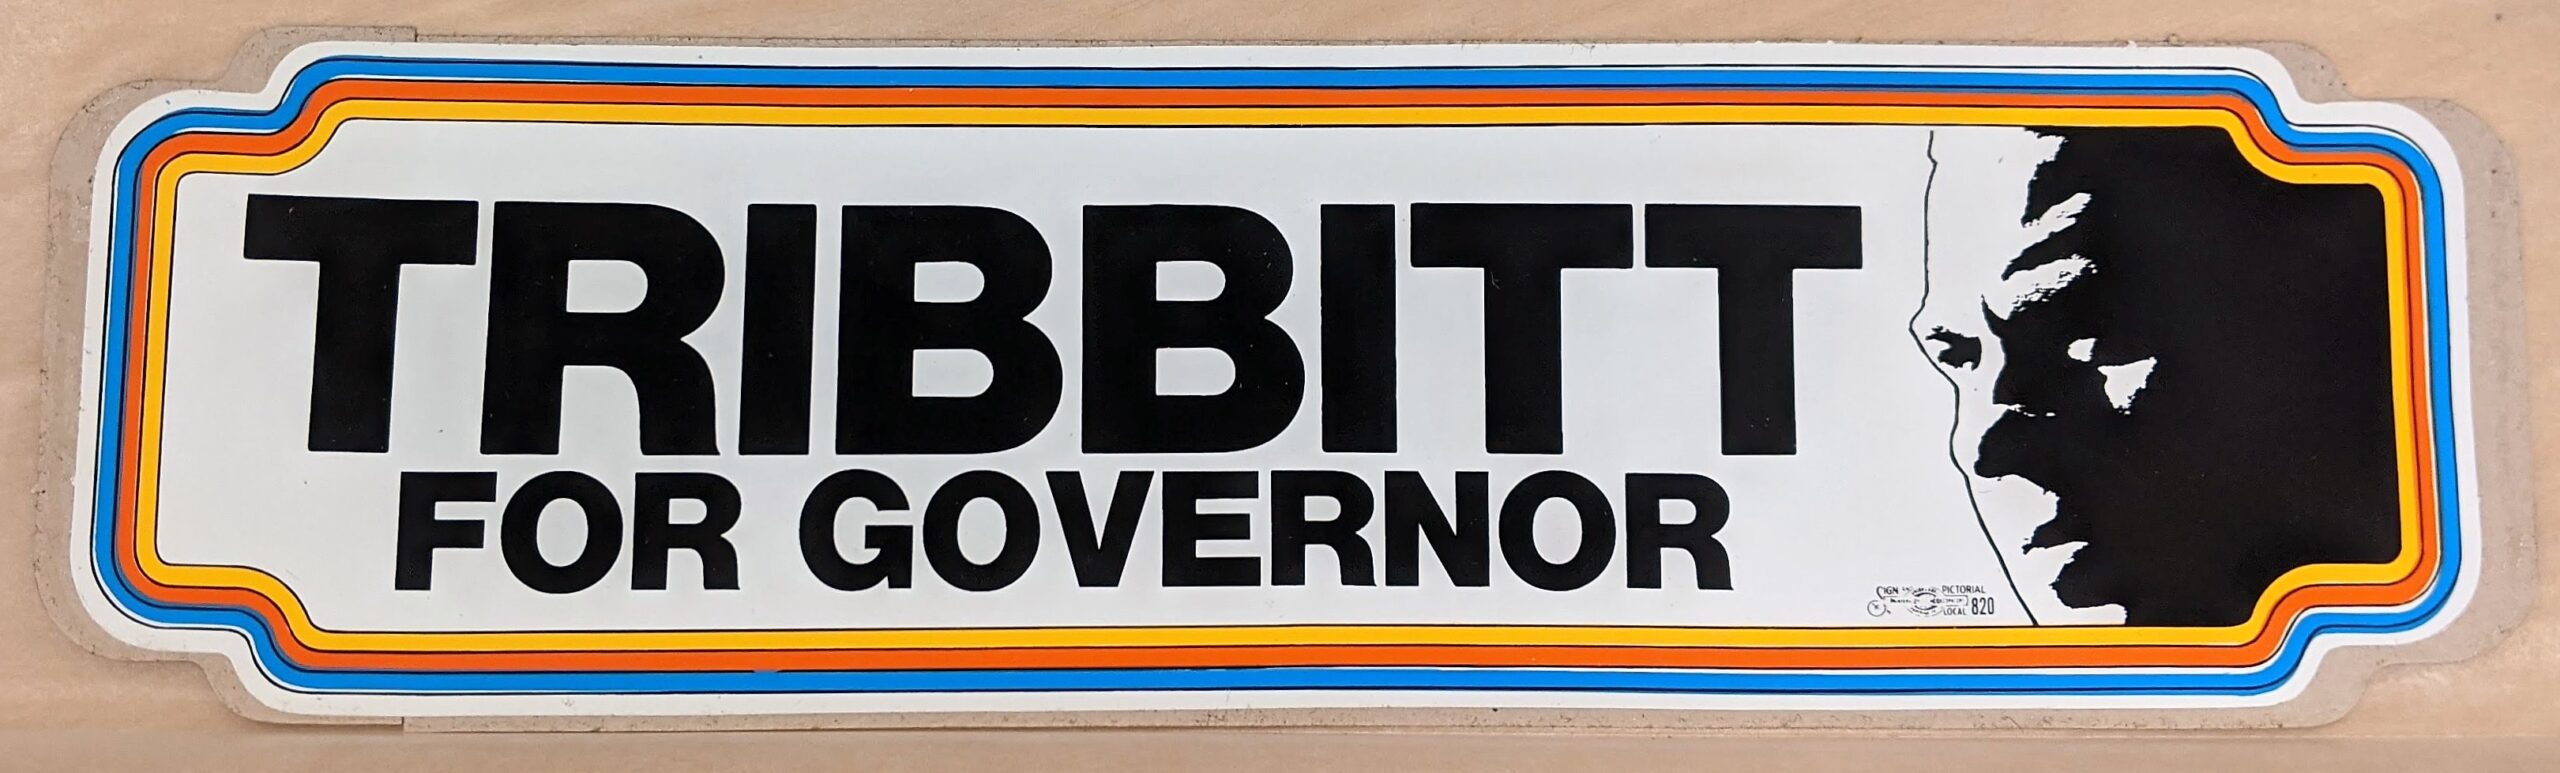 Creator unknown, “[Sherman] Tribbitt for Governor” bumper sticker, 1972, from the Jerome O. Herlihy political campaign ephemera collection